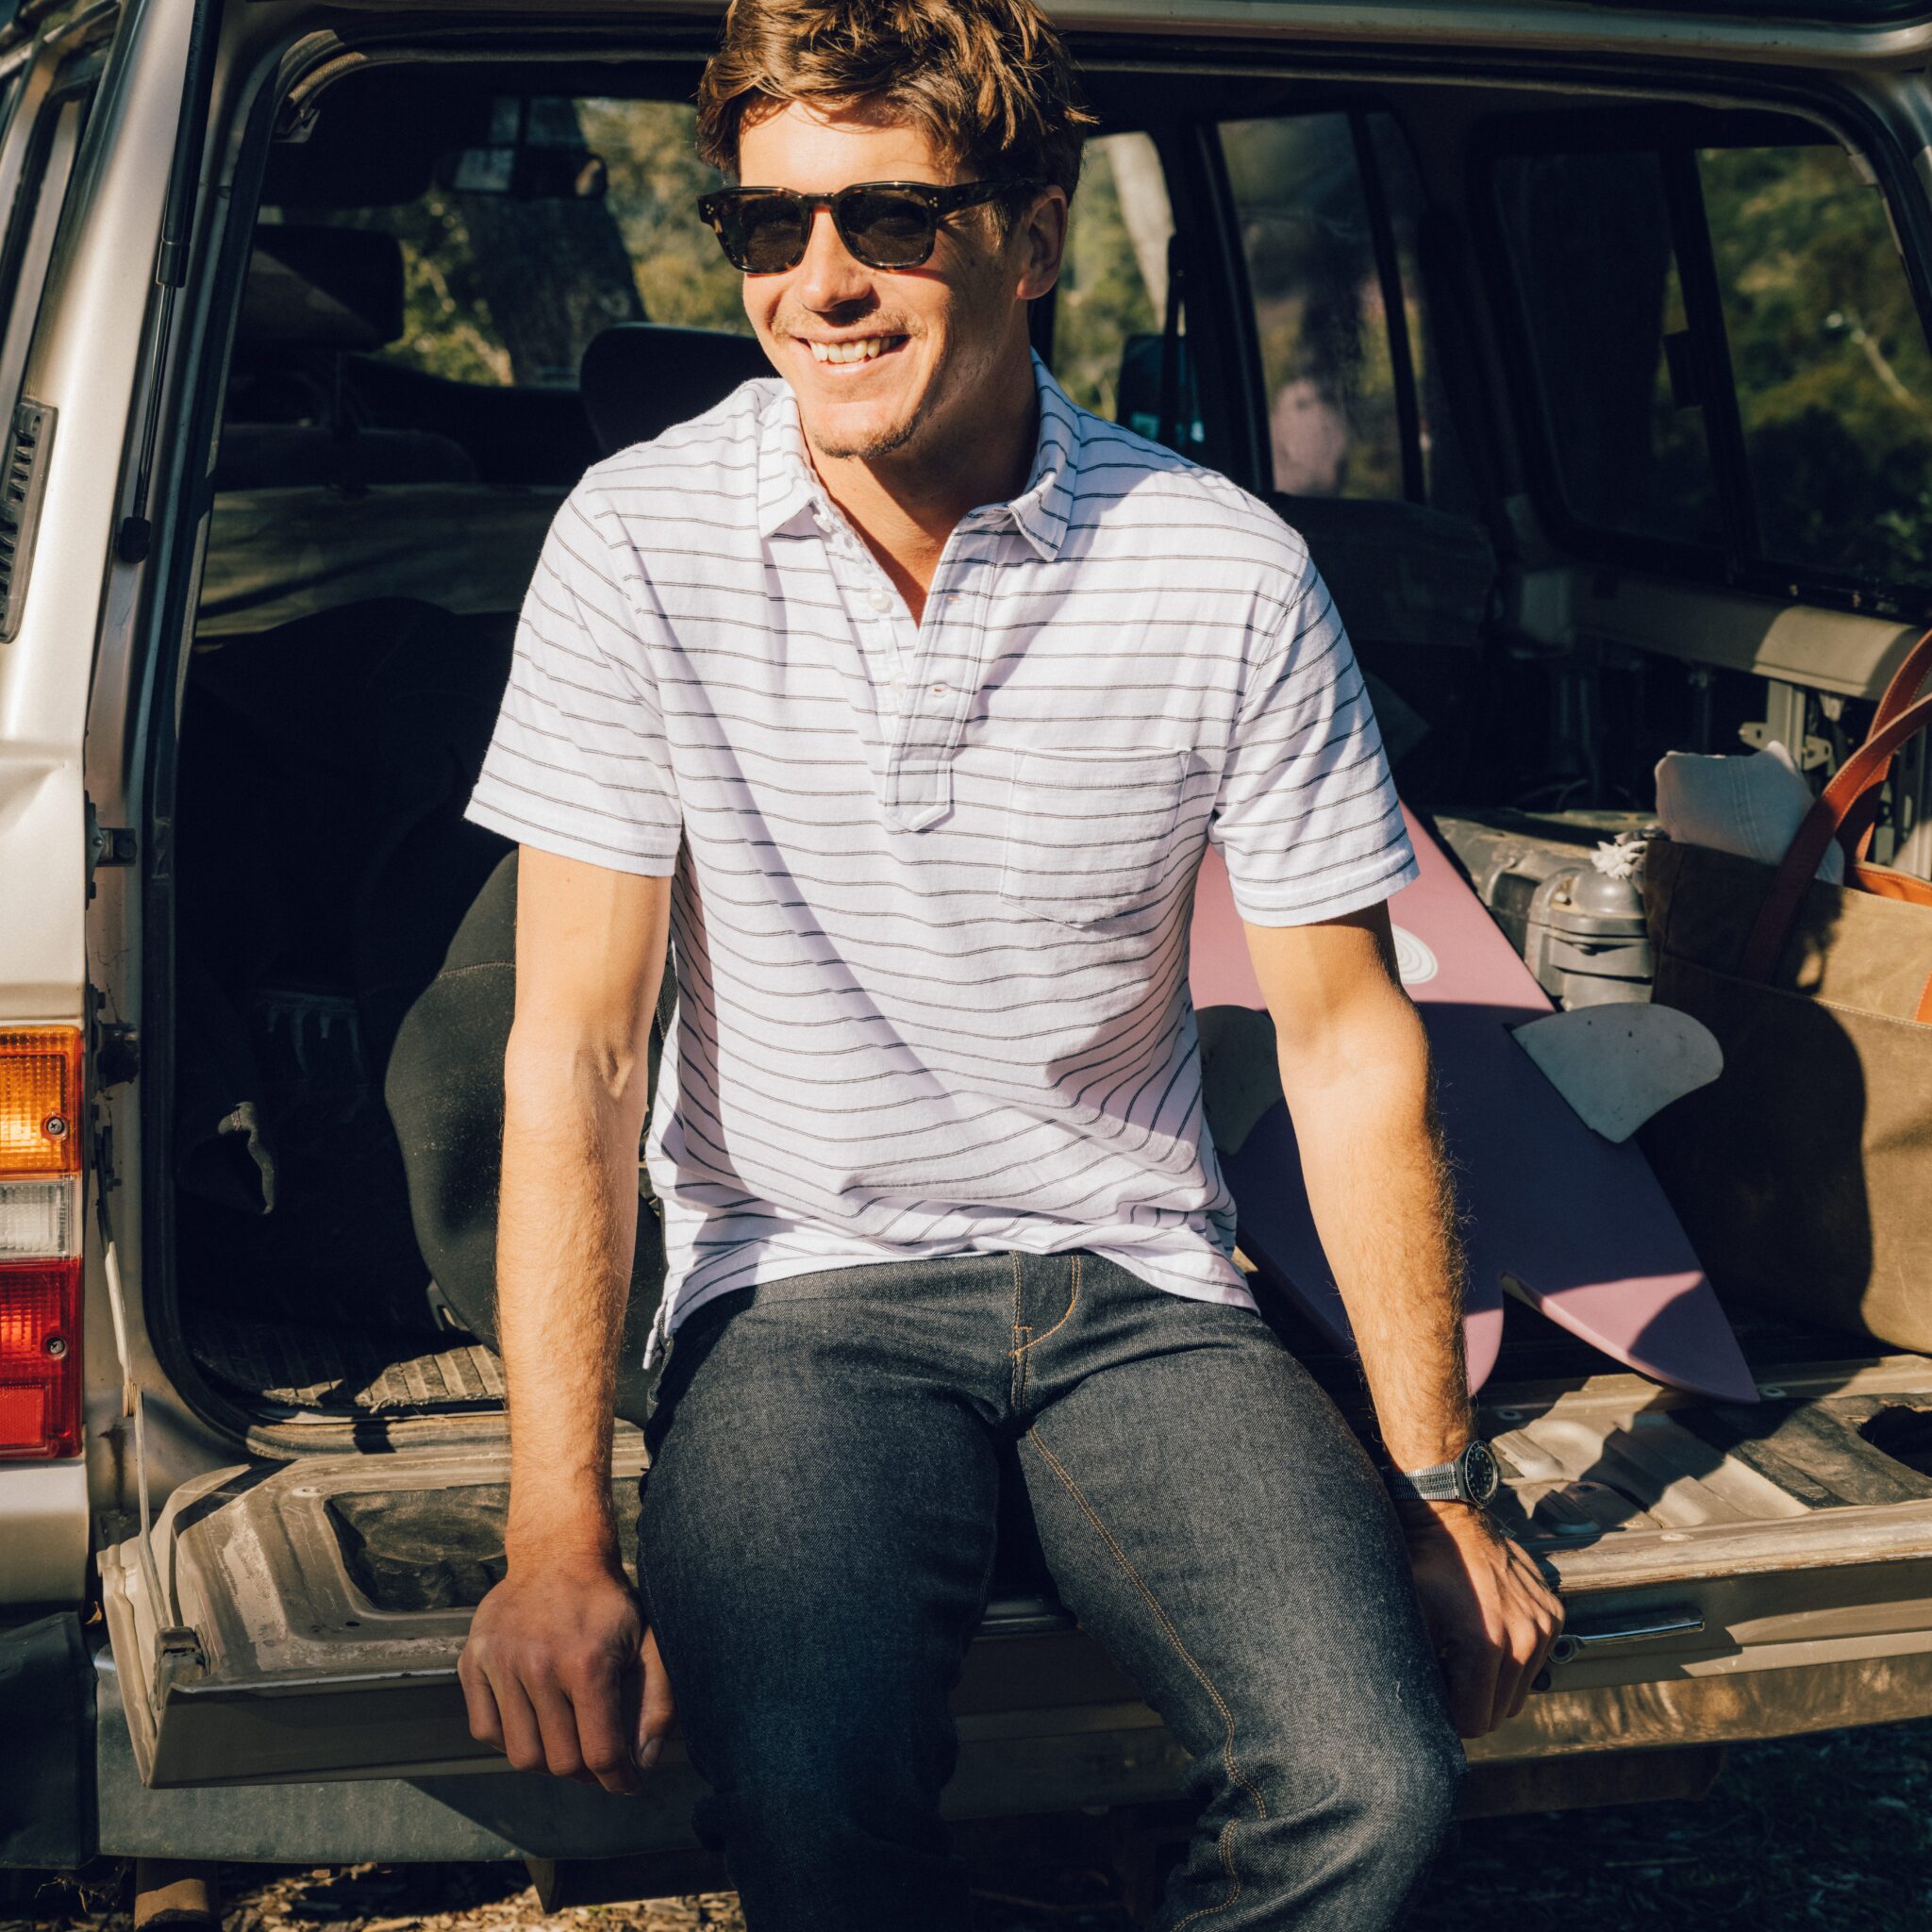 8 of the best lightweight men’s shirts and tops for summer | The Coolector